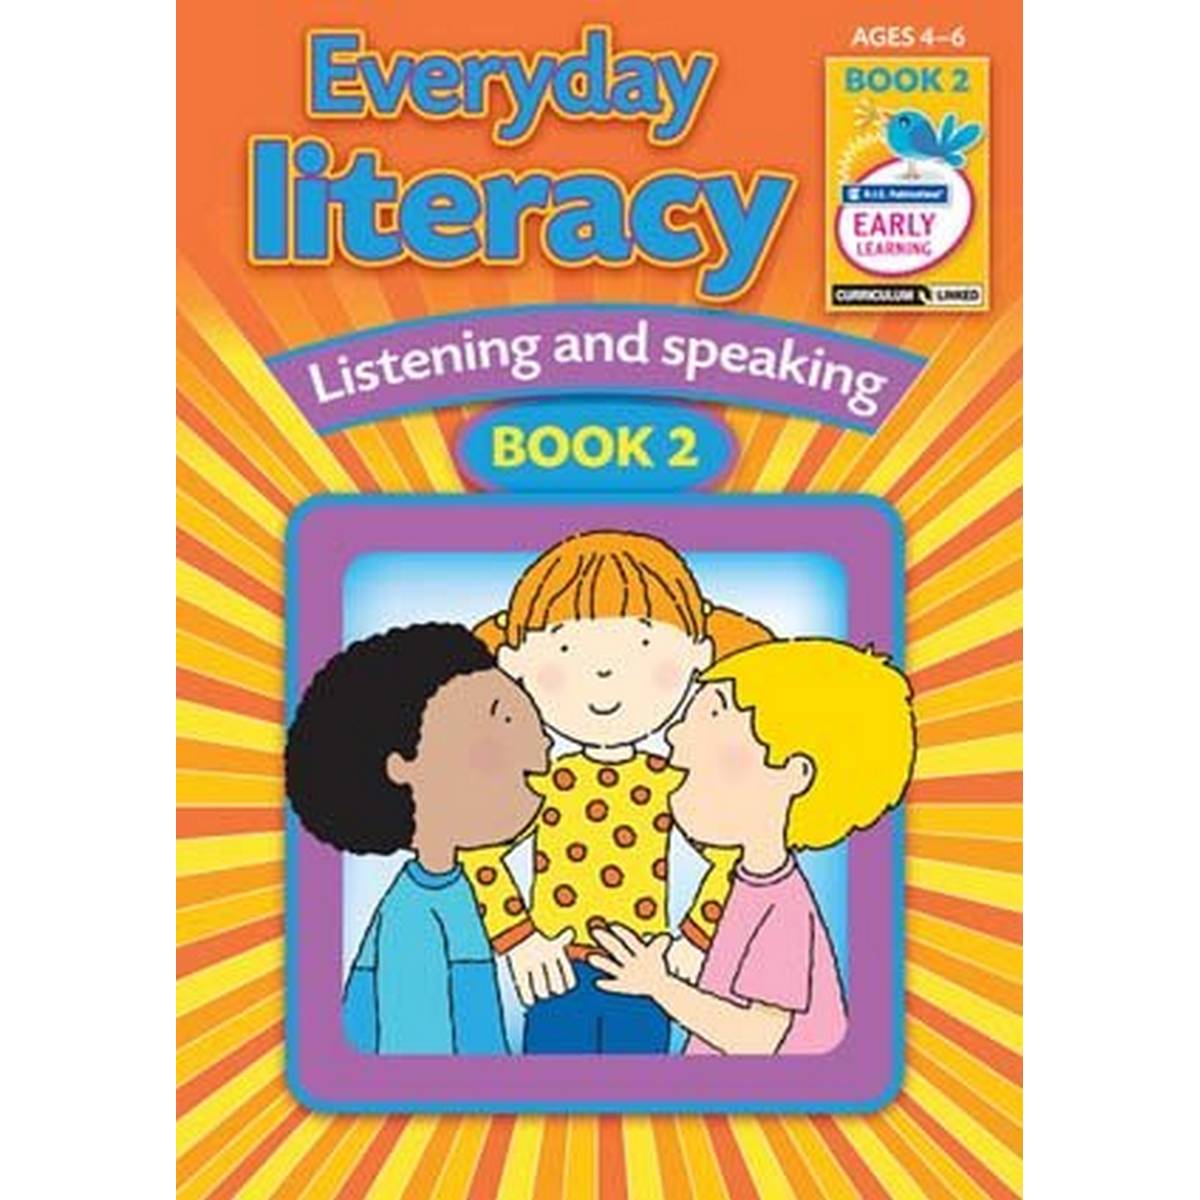 Everyday literacy: Speaking and listening - Book 2 (ages 4-6)